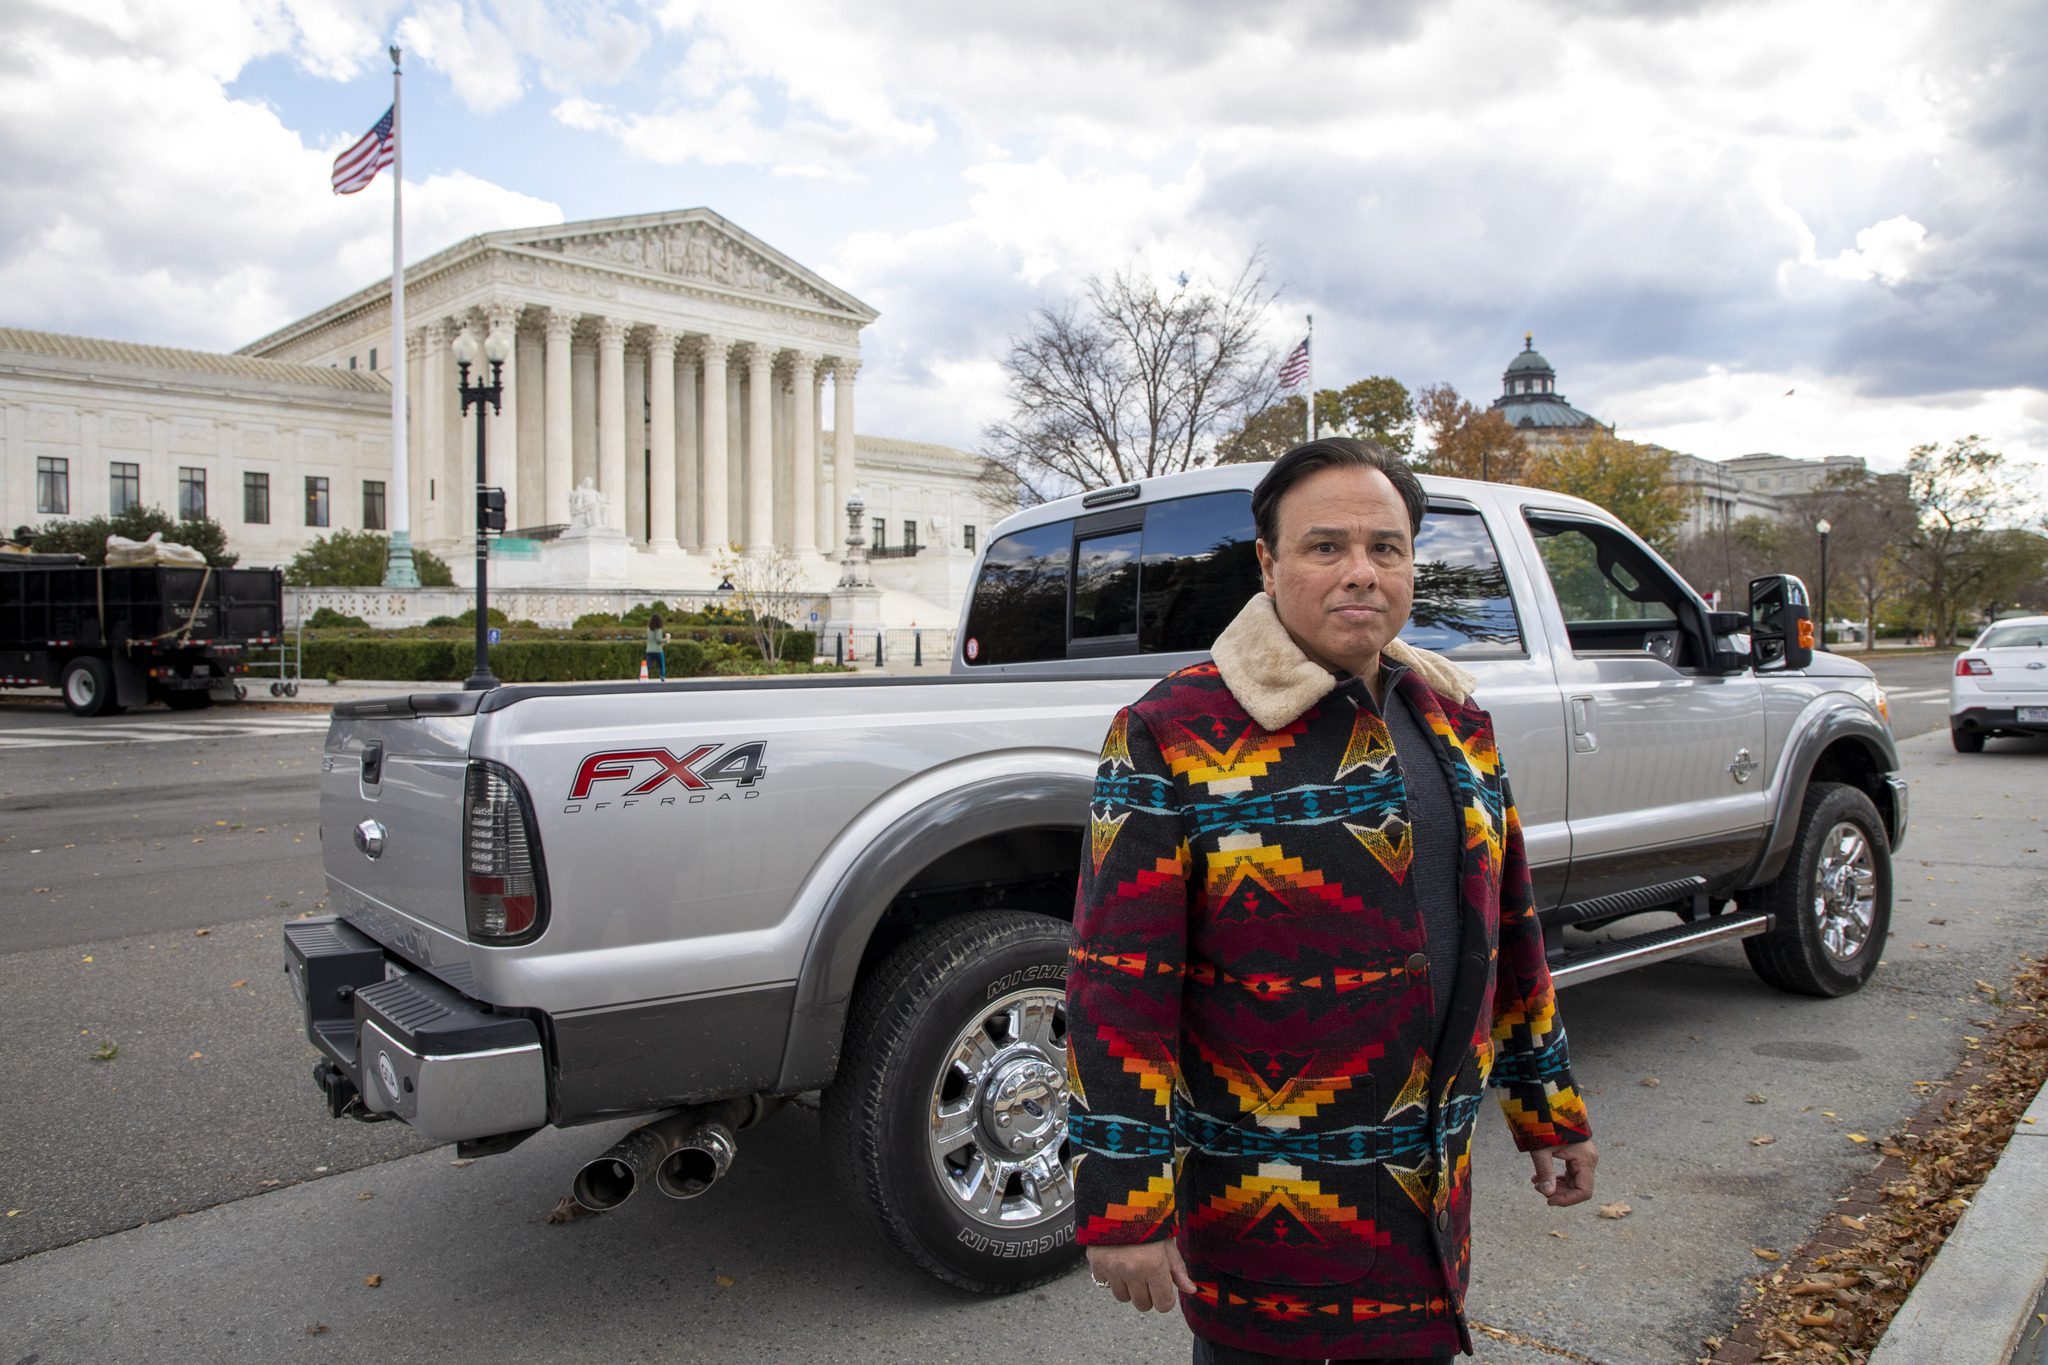 The U.S. Customs and Border Protection (CBP) agency seized and held Gerardo Serrano's truck-parked here in front of the U.S. Supreme Court-for over two years never granting him a hearing to get it back.  The CBP took the truck because he mistakenly left five low-caliber bullets inside the console, which the CBP called 